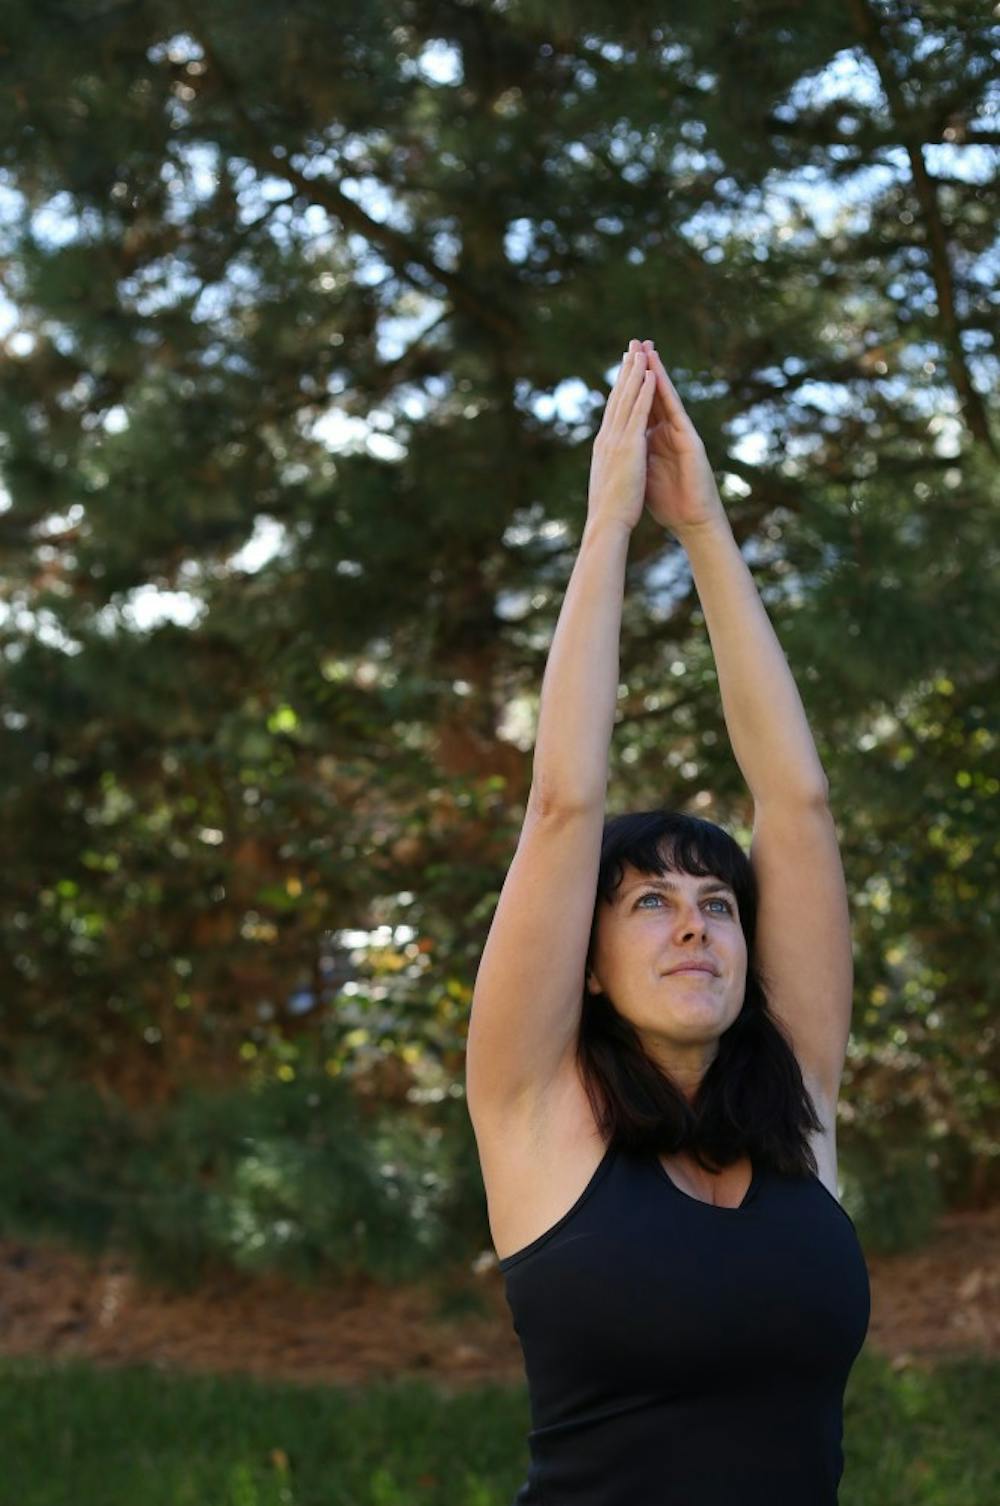 <p>Tree Pose</p><ol><li>Stand tall with your arms down at your sides</li><li>Bring your right foot up onto your left thigh</li><li>The left leg should be straight and you should be balanced</li><li>After finding your balance, breathe in and raise your arms over your head and bring your palms together</li></ol>